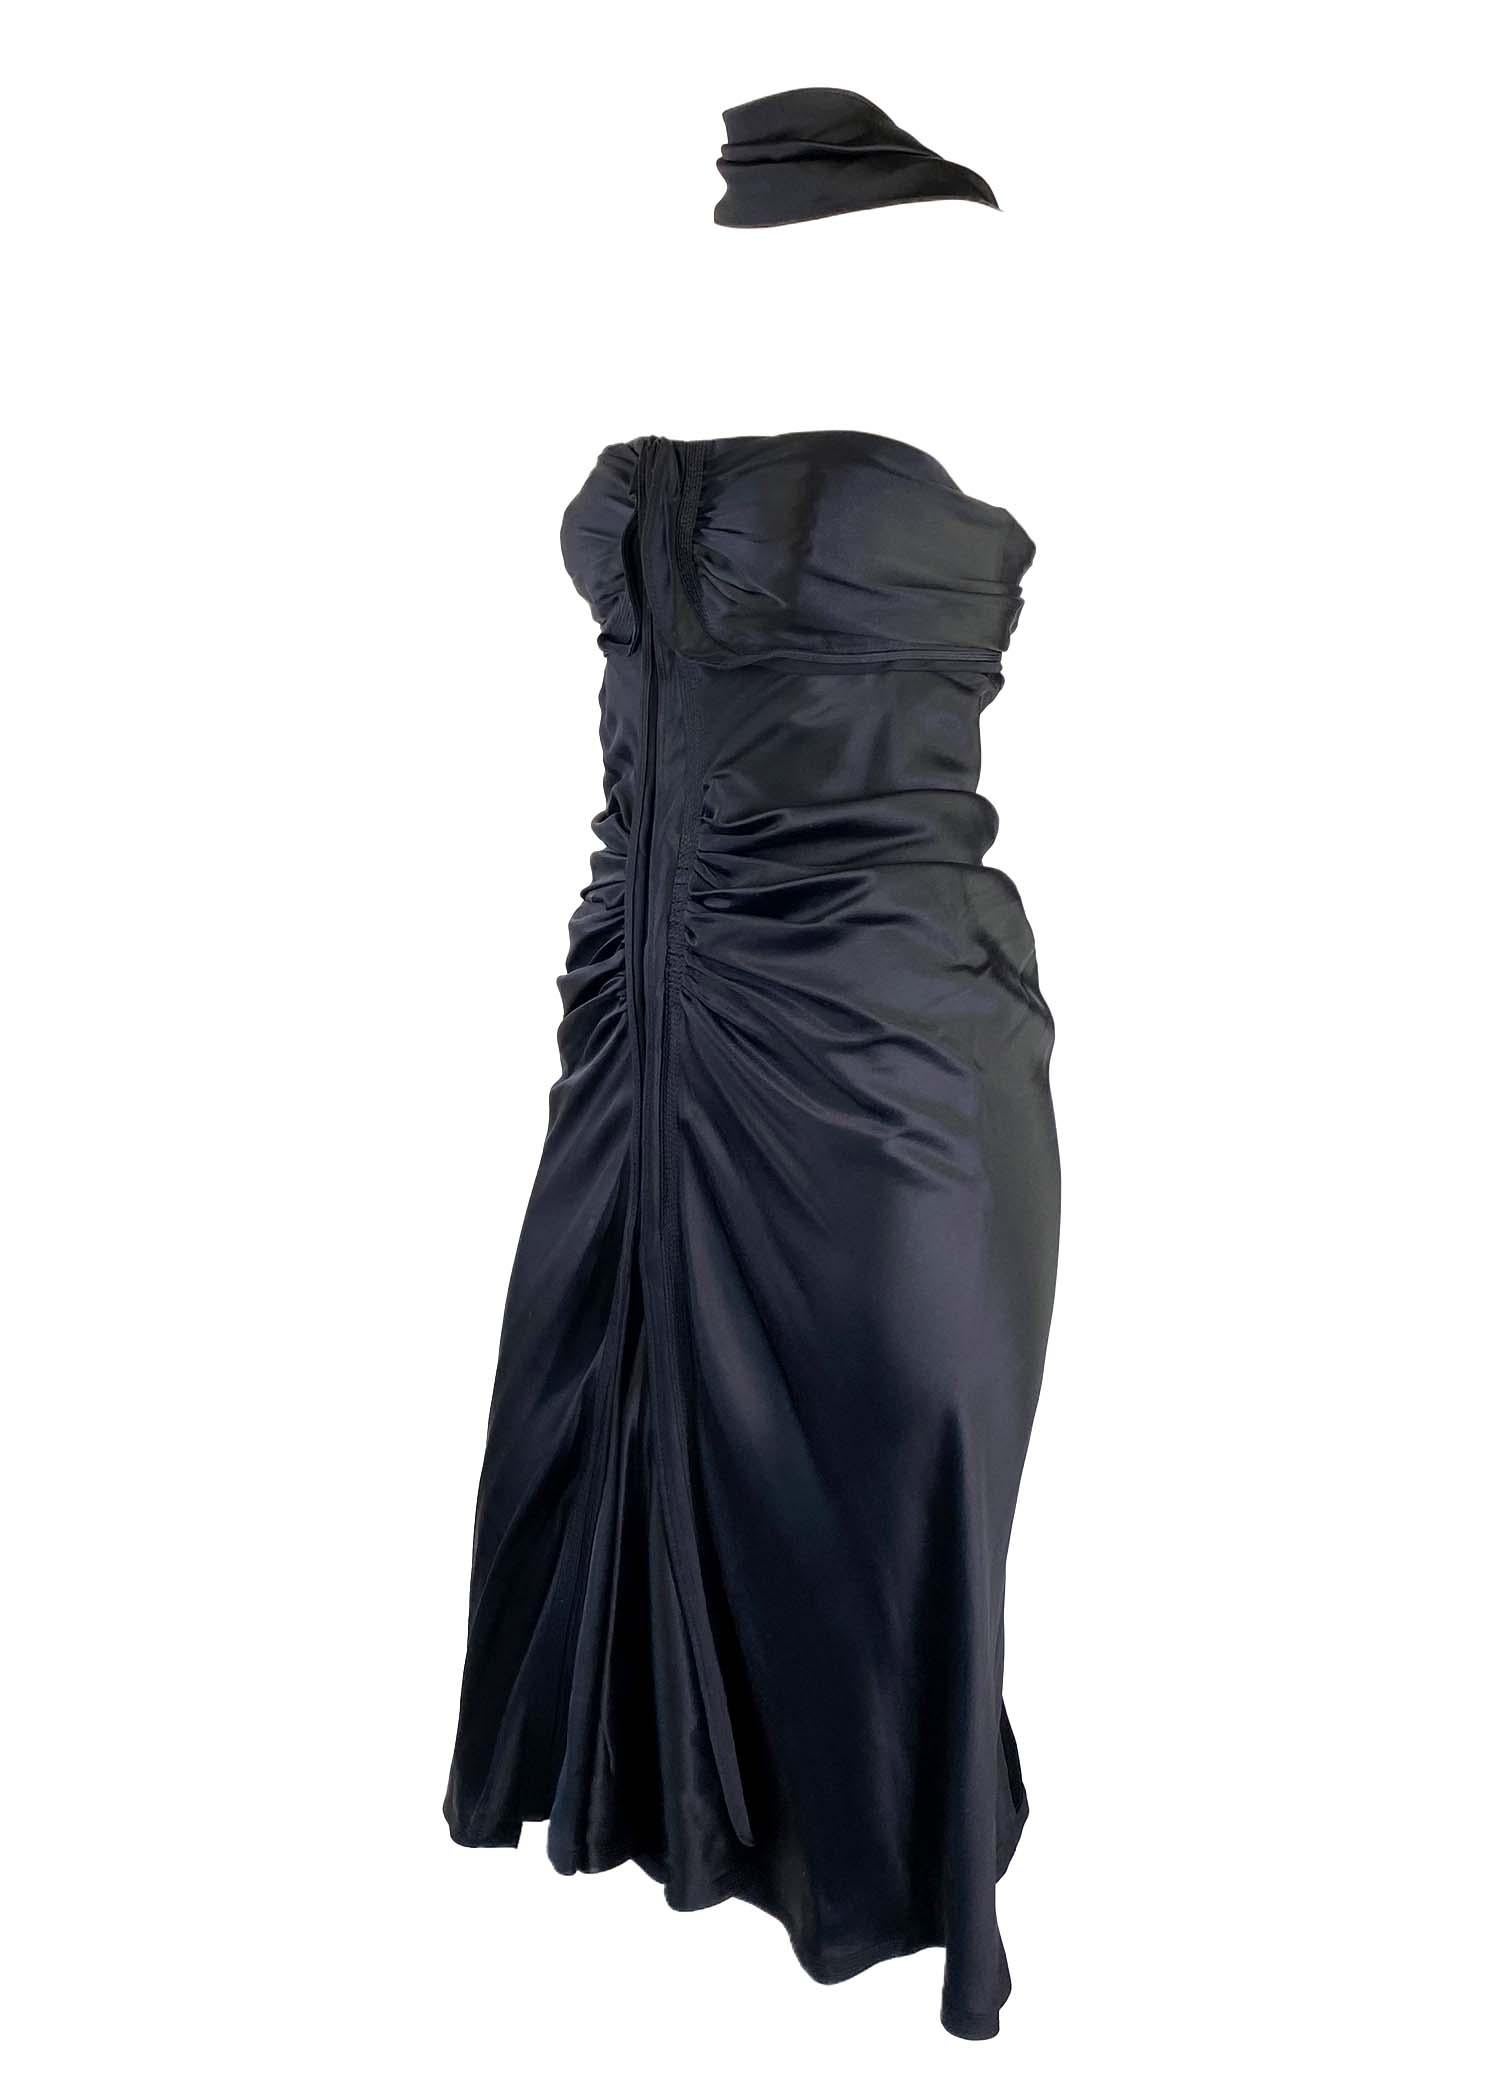 F/W 2003 Yves Saint Laurent by Tom Ford Black Silk Ruched Ruffle Cocktail Dress For Sale 1